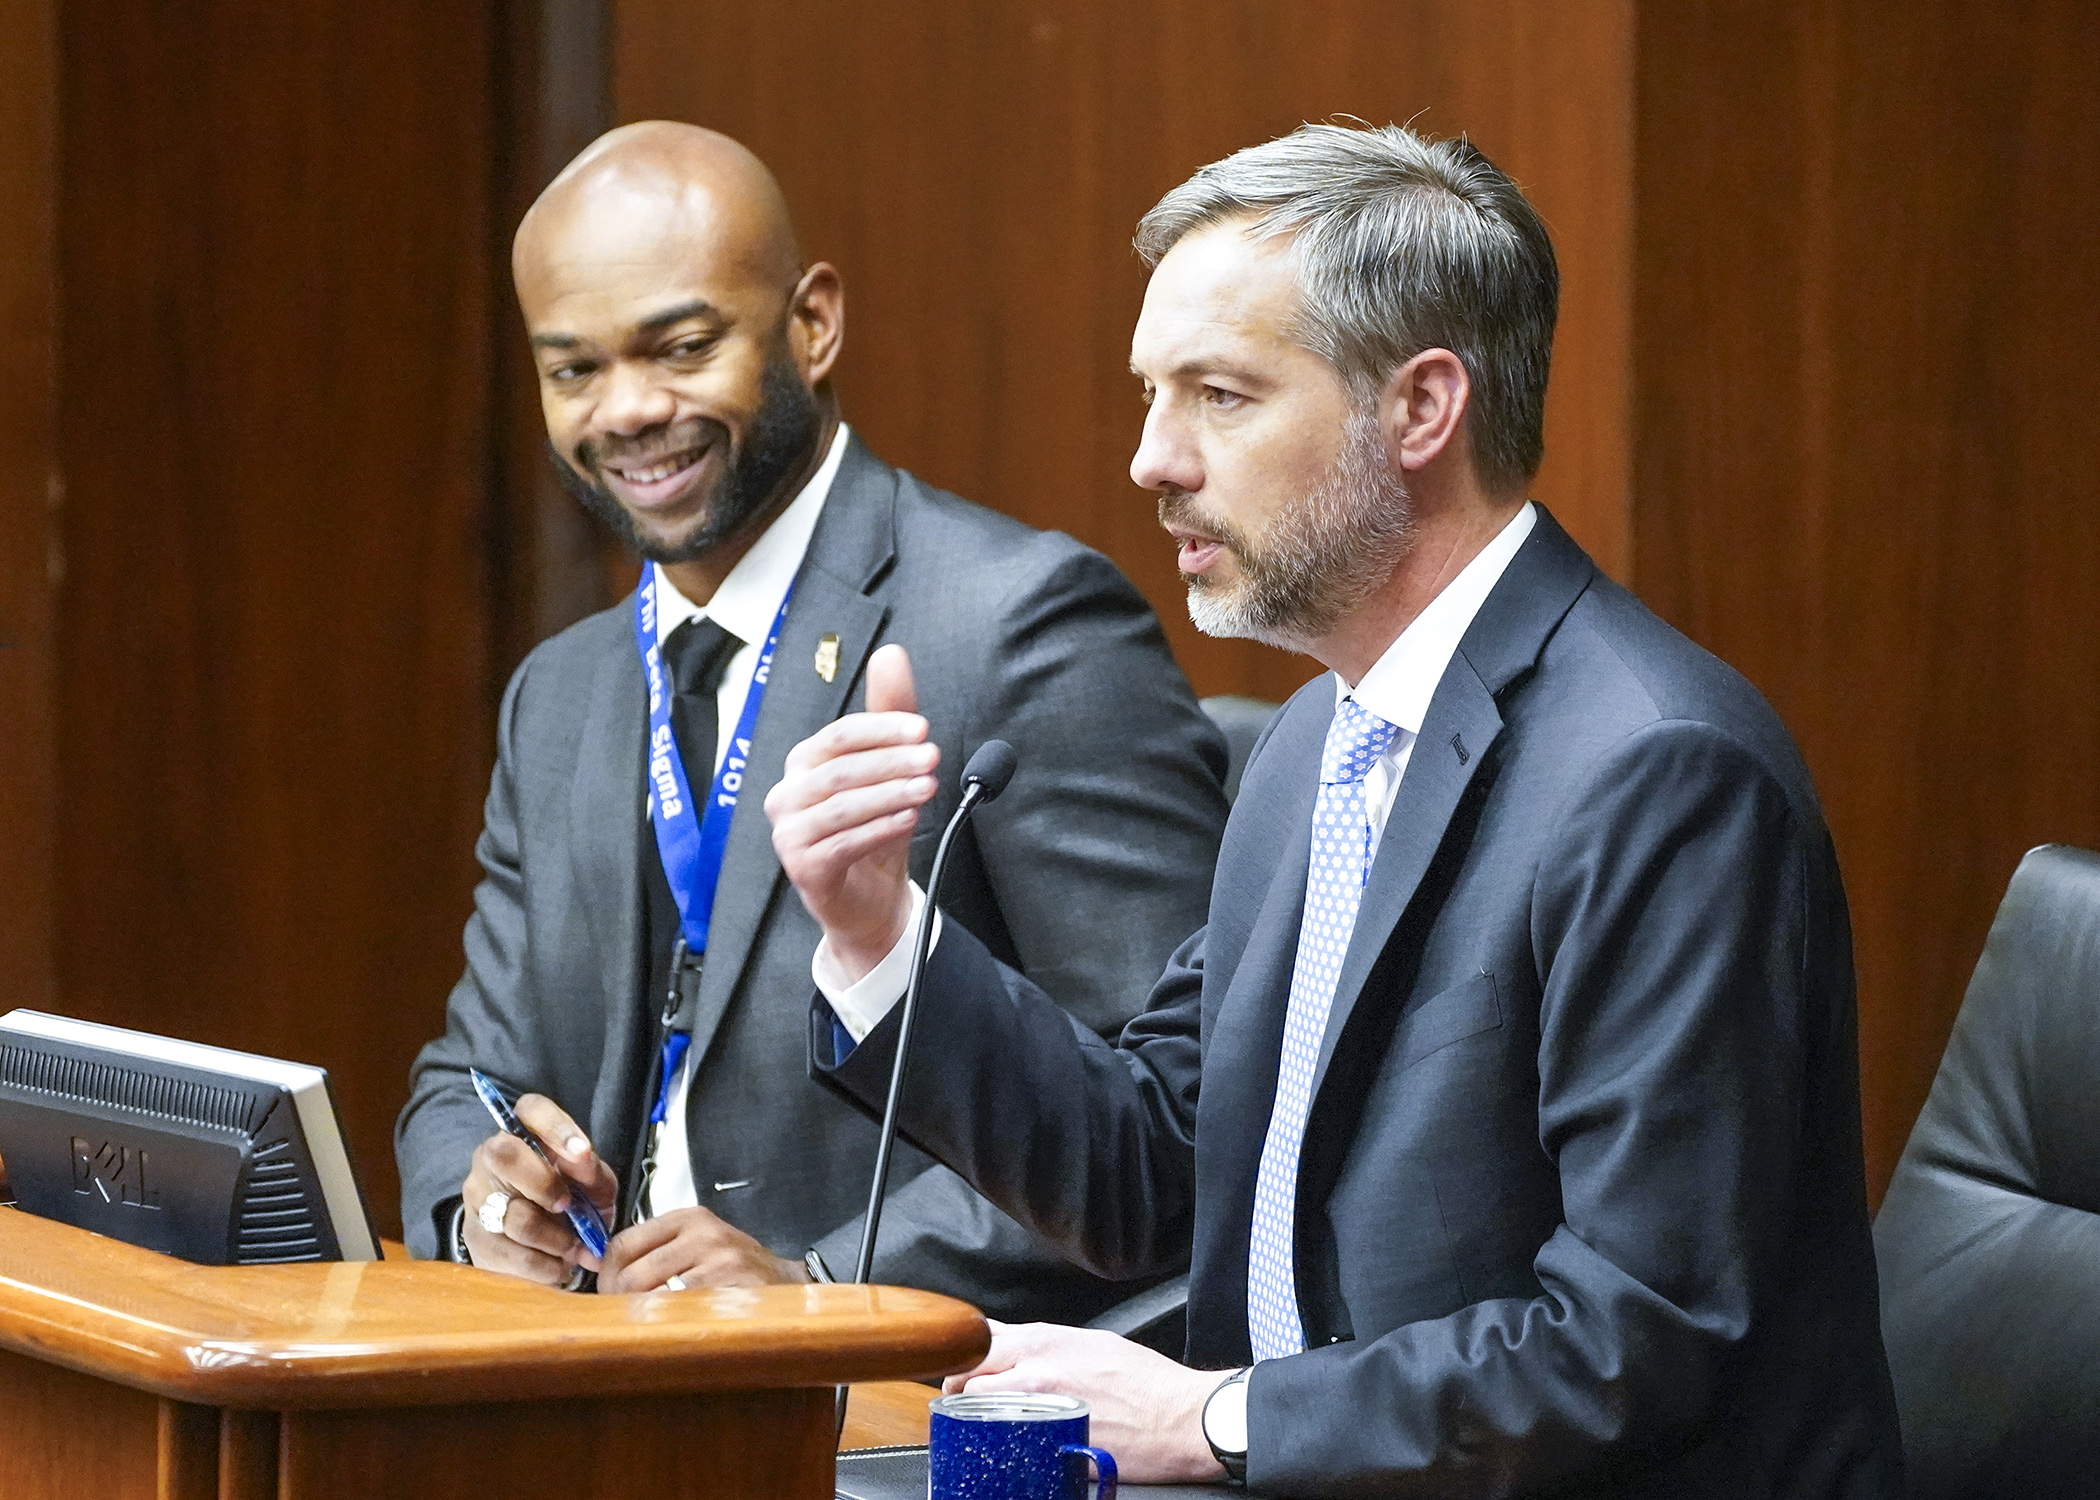 Department of Employment and Economic Development Commissioner Matt Varilek testifies April 24 before the House workforce committee in support of a bill sponsored by Rep. Cedrick Frazier, left, to modify Minnesota paid leave law provisions. (Photo by Andrew VonBank)